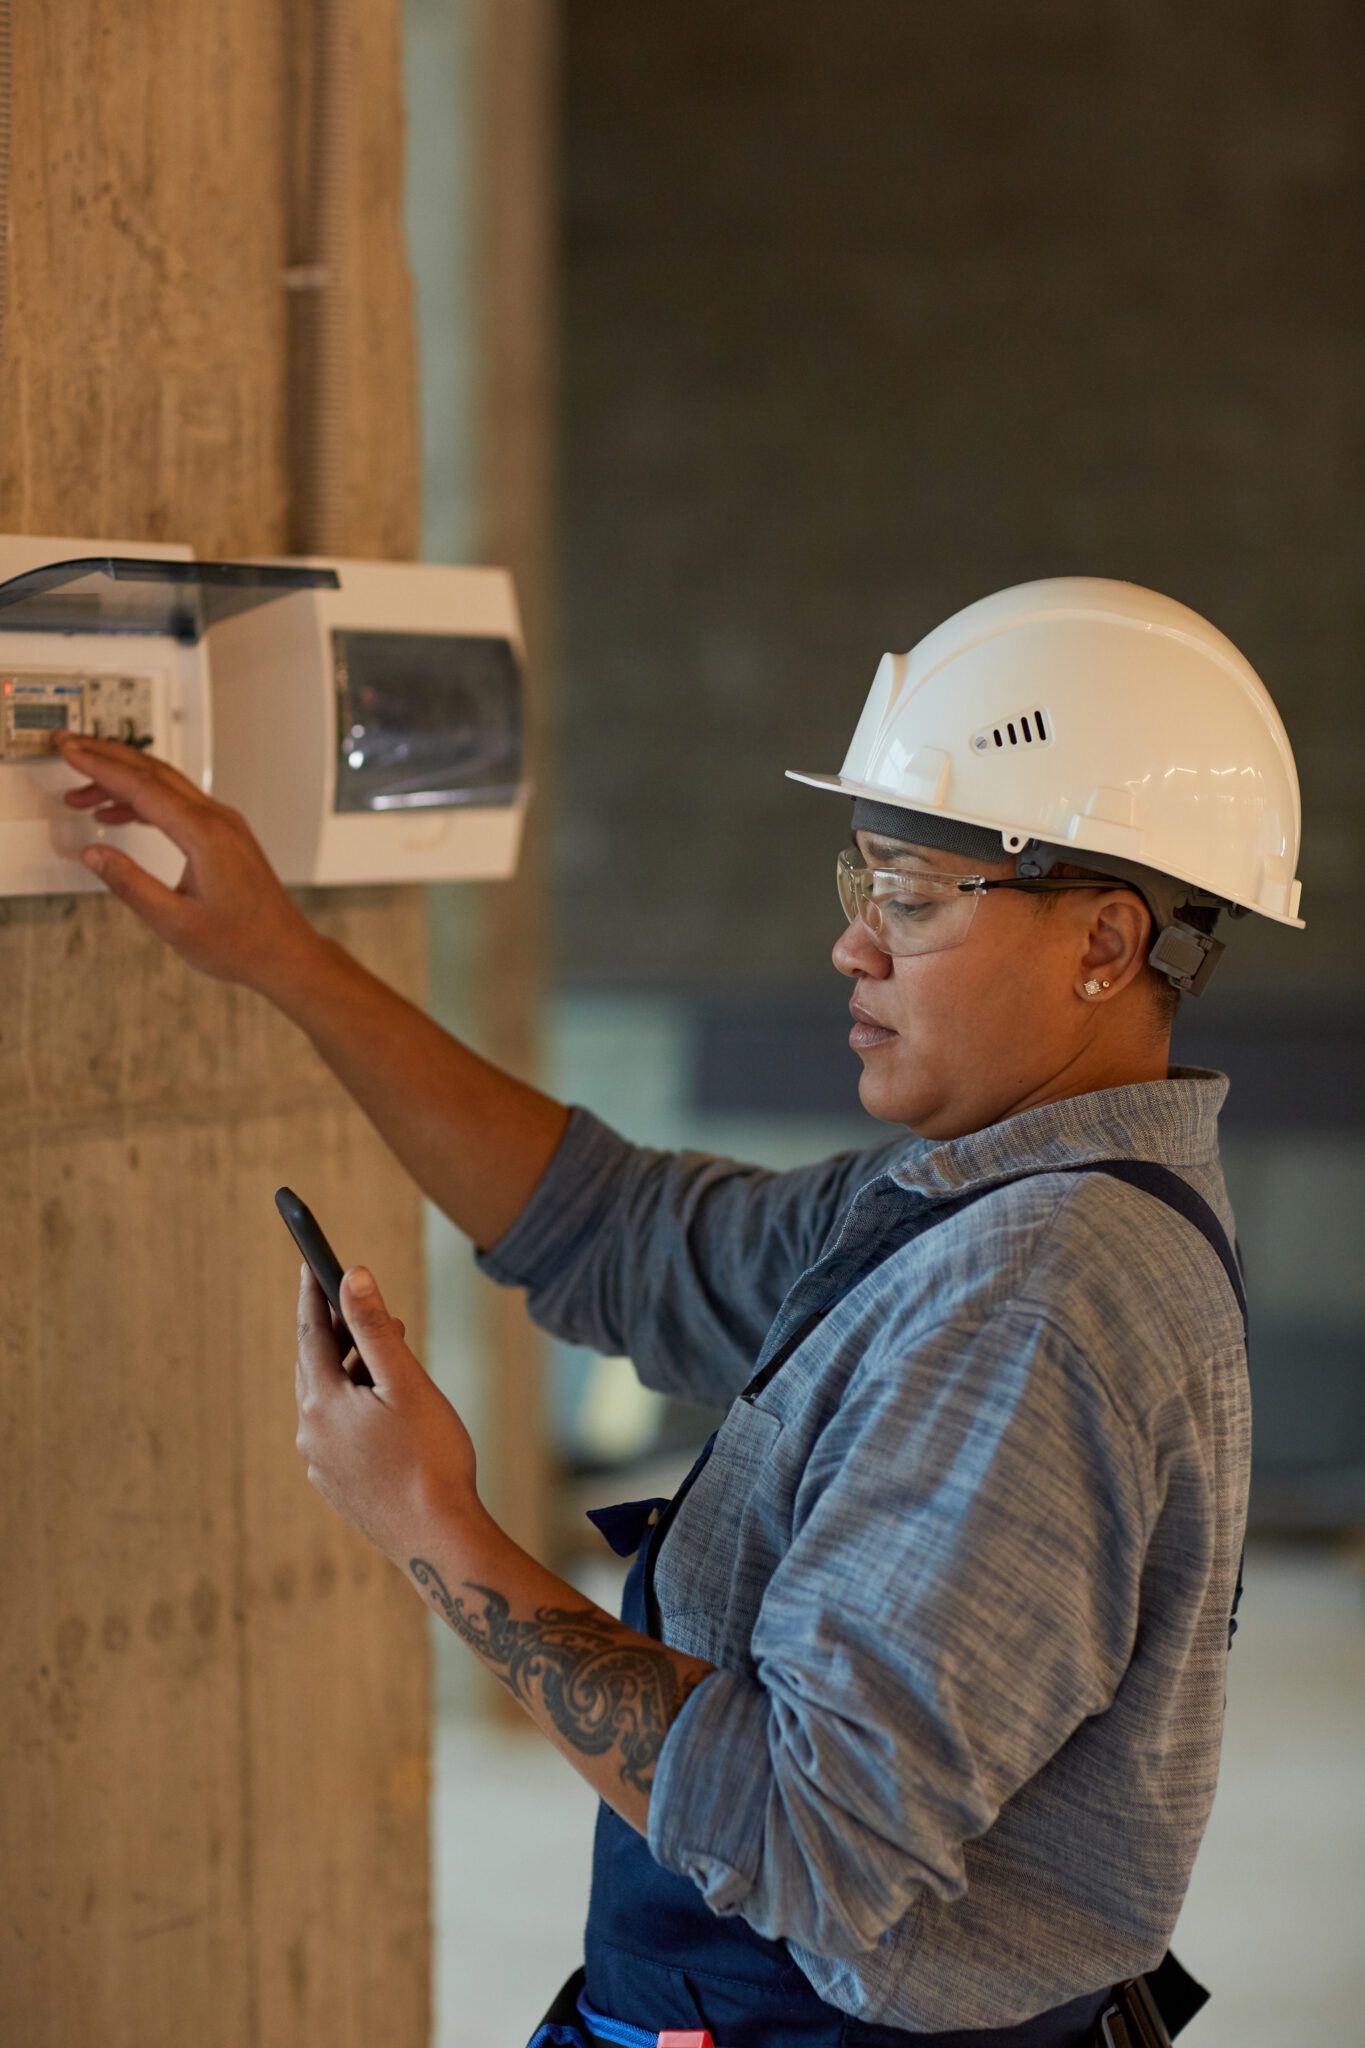 Vertical side view portrait of female worker setting up electricity and using smartphone while working on construction site